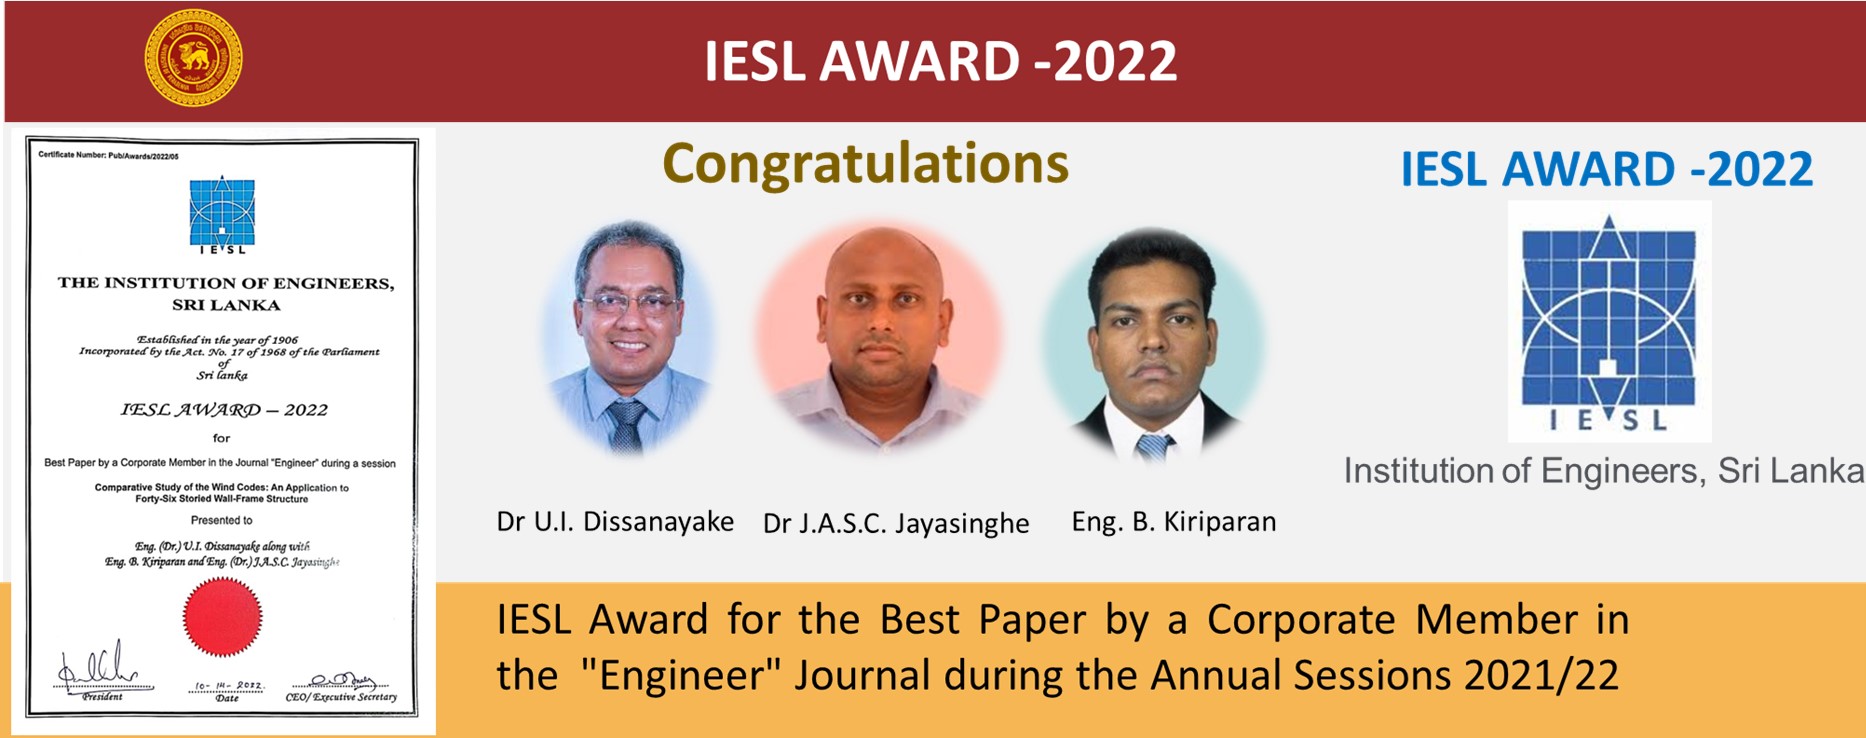 IESL AWARD - 2022 for Best Paper - during the session 2021/22